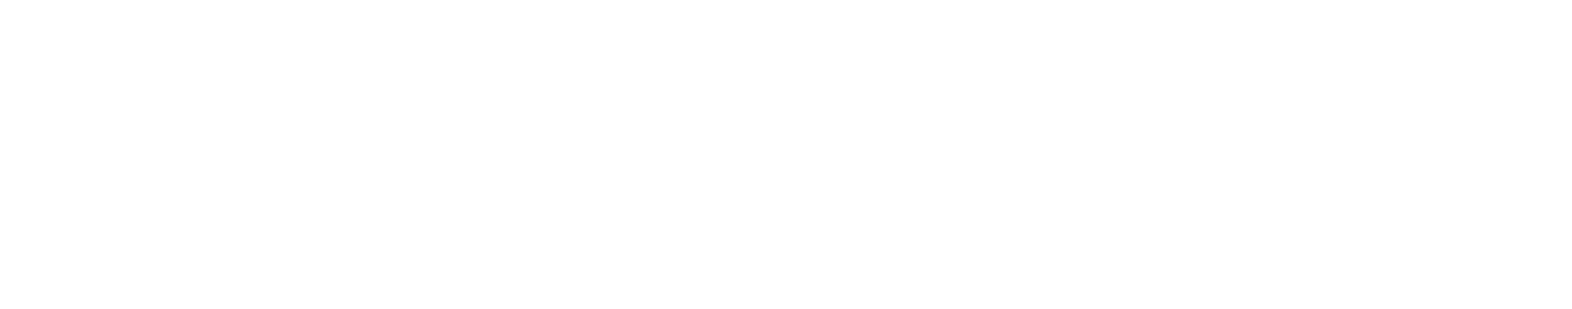 Net One Systems logo large for dark backgrounds (transparent PNG)